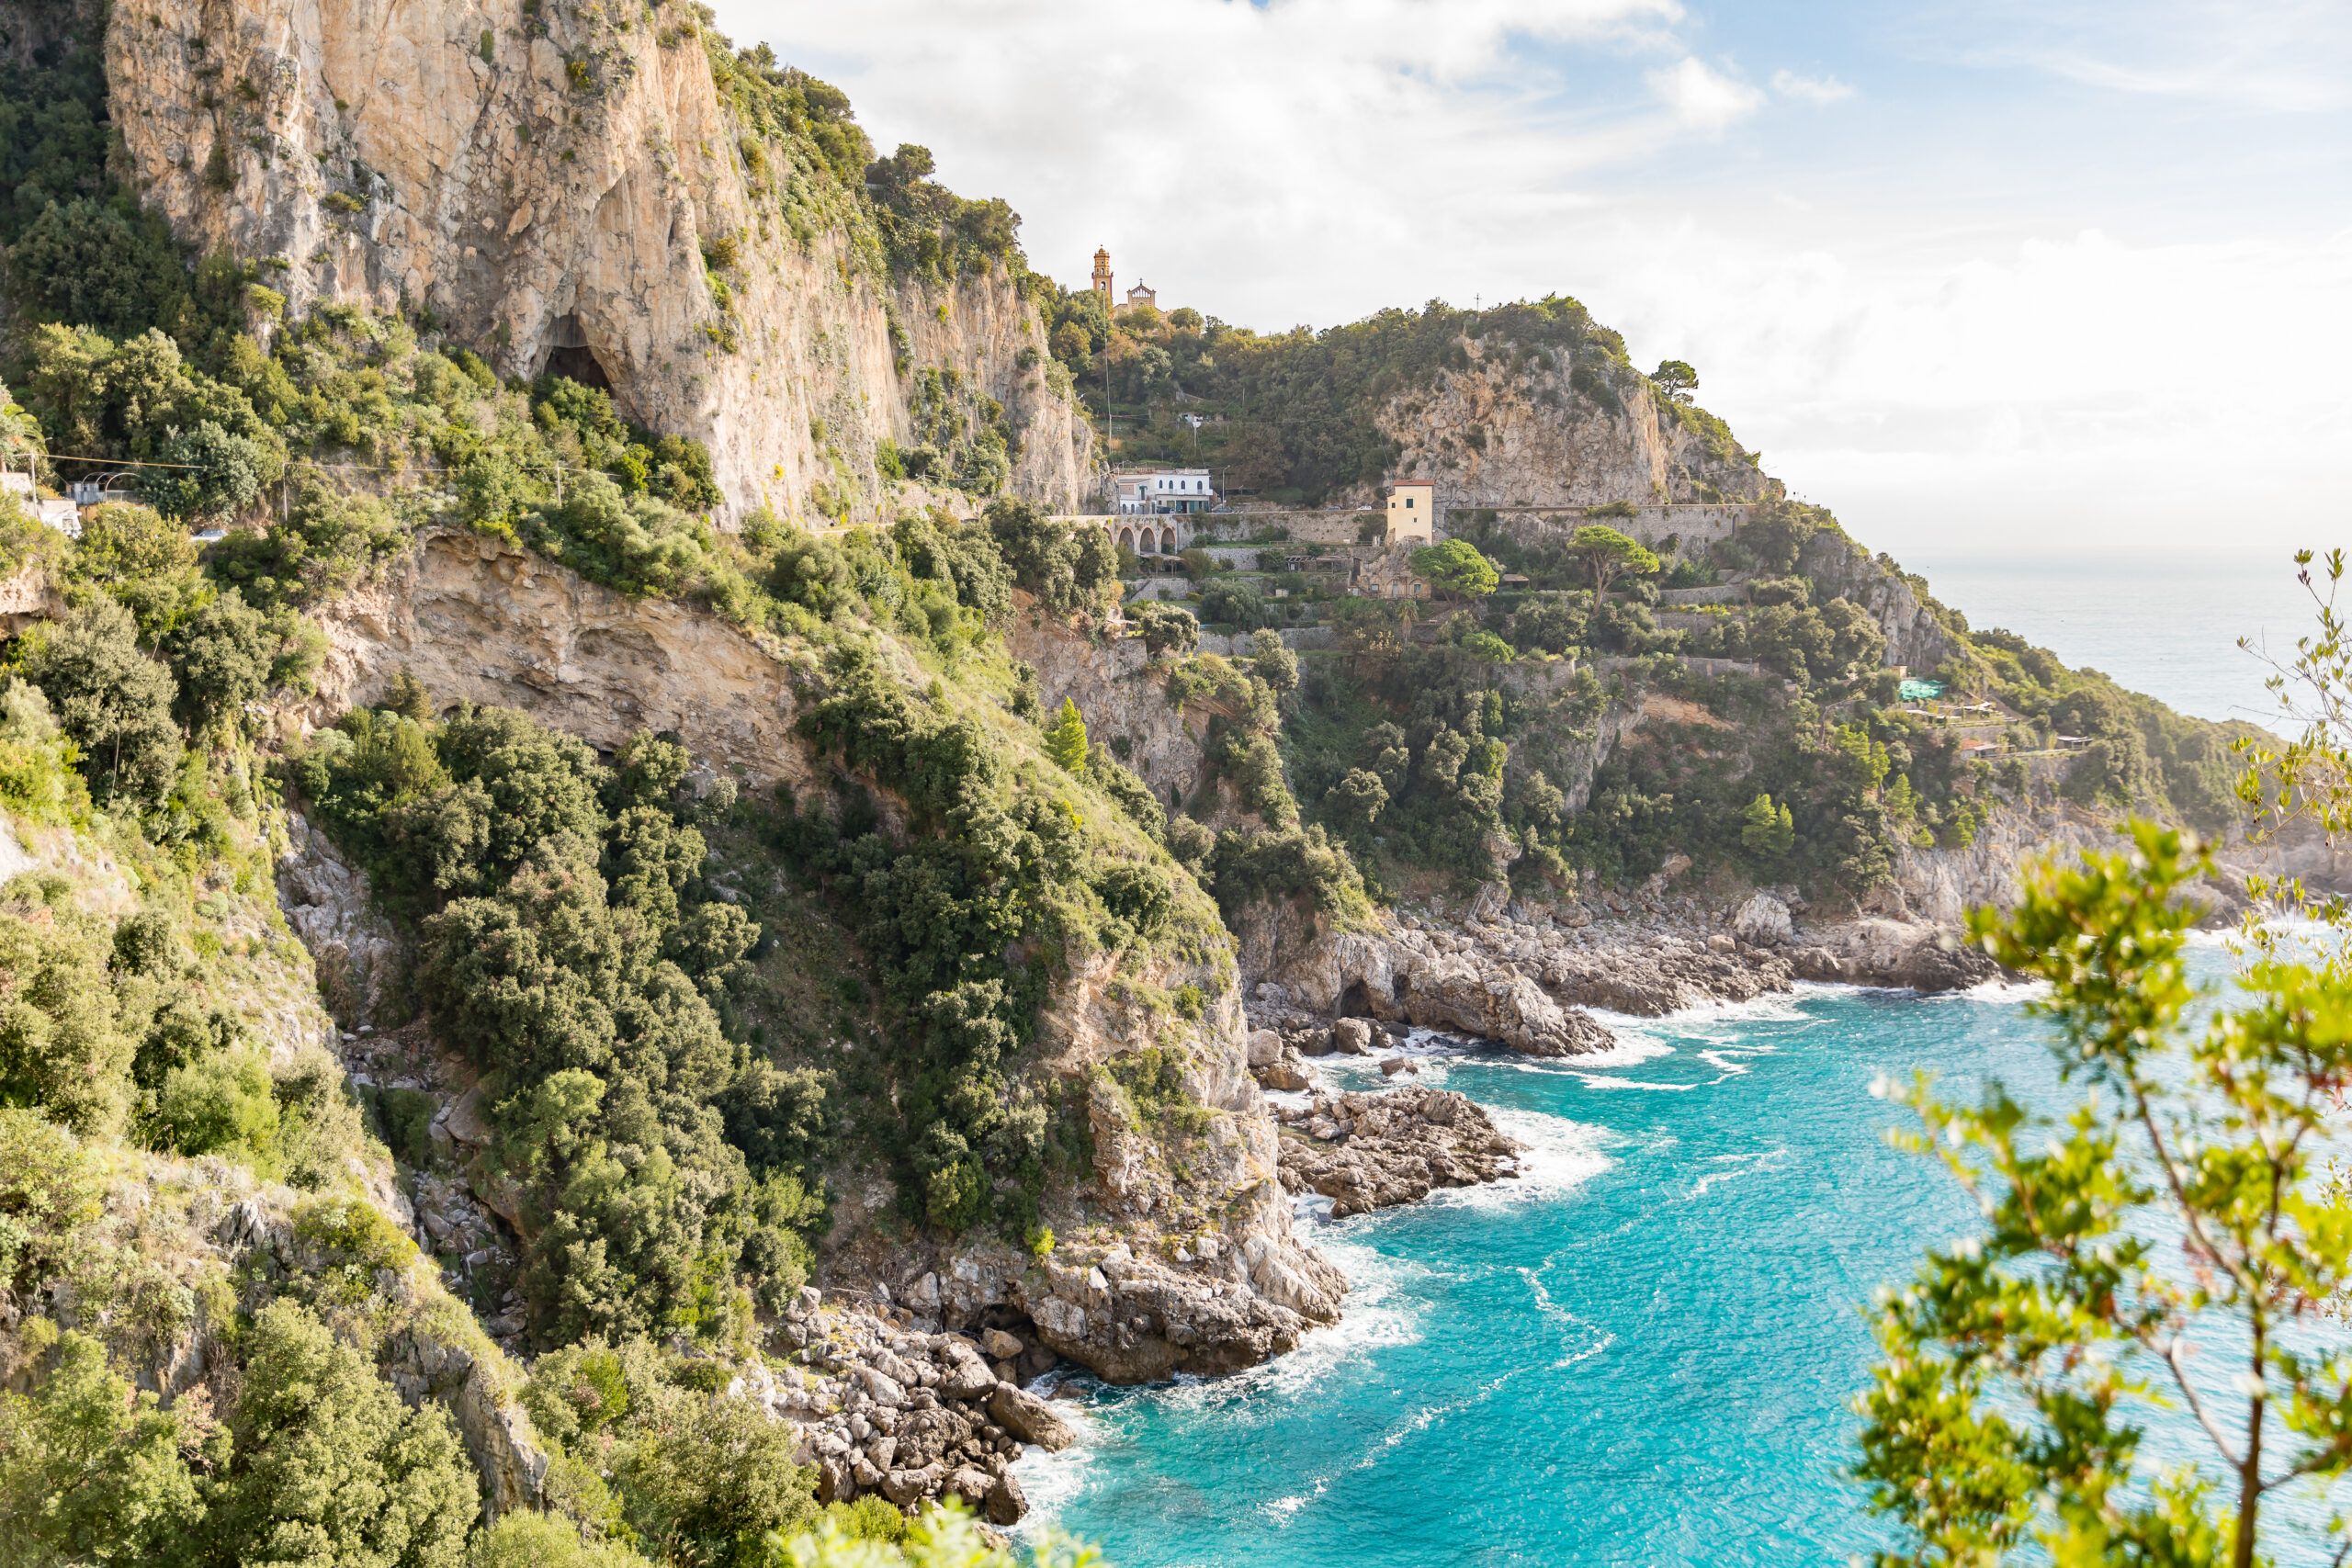 Nestled within the enchanting embrace of the Amalfi Coast, Anantara Convento di Amalfi Grand Hotel is a place you need to add to your list this Spring.